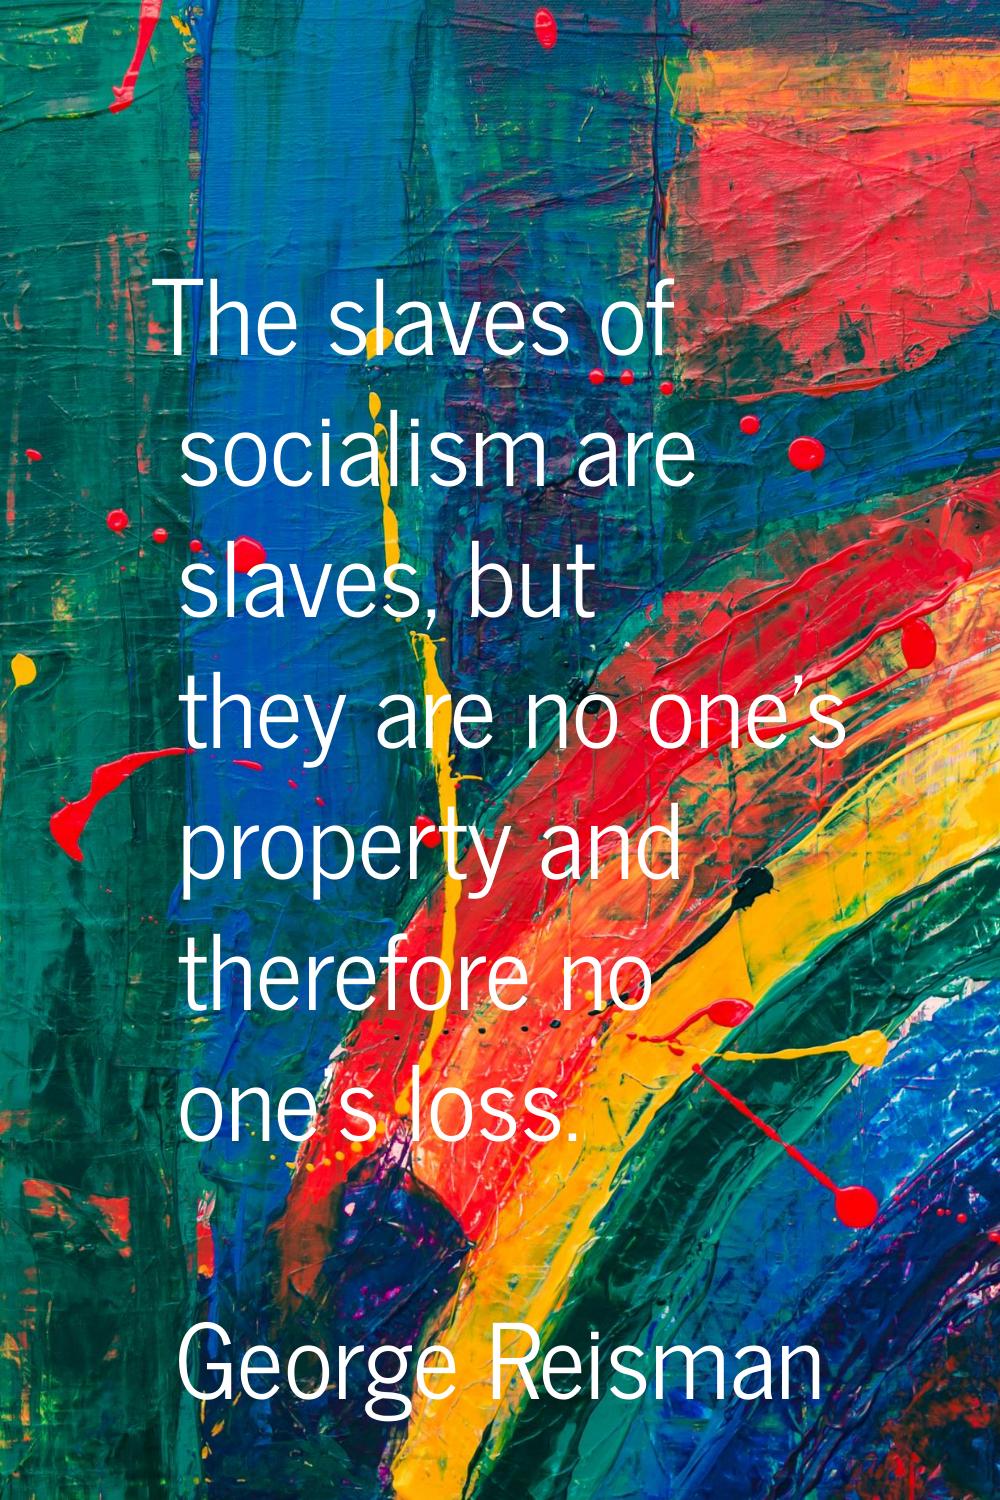 The slaves of socialism are slaves, but they are no one's property and therefore no one's loss.